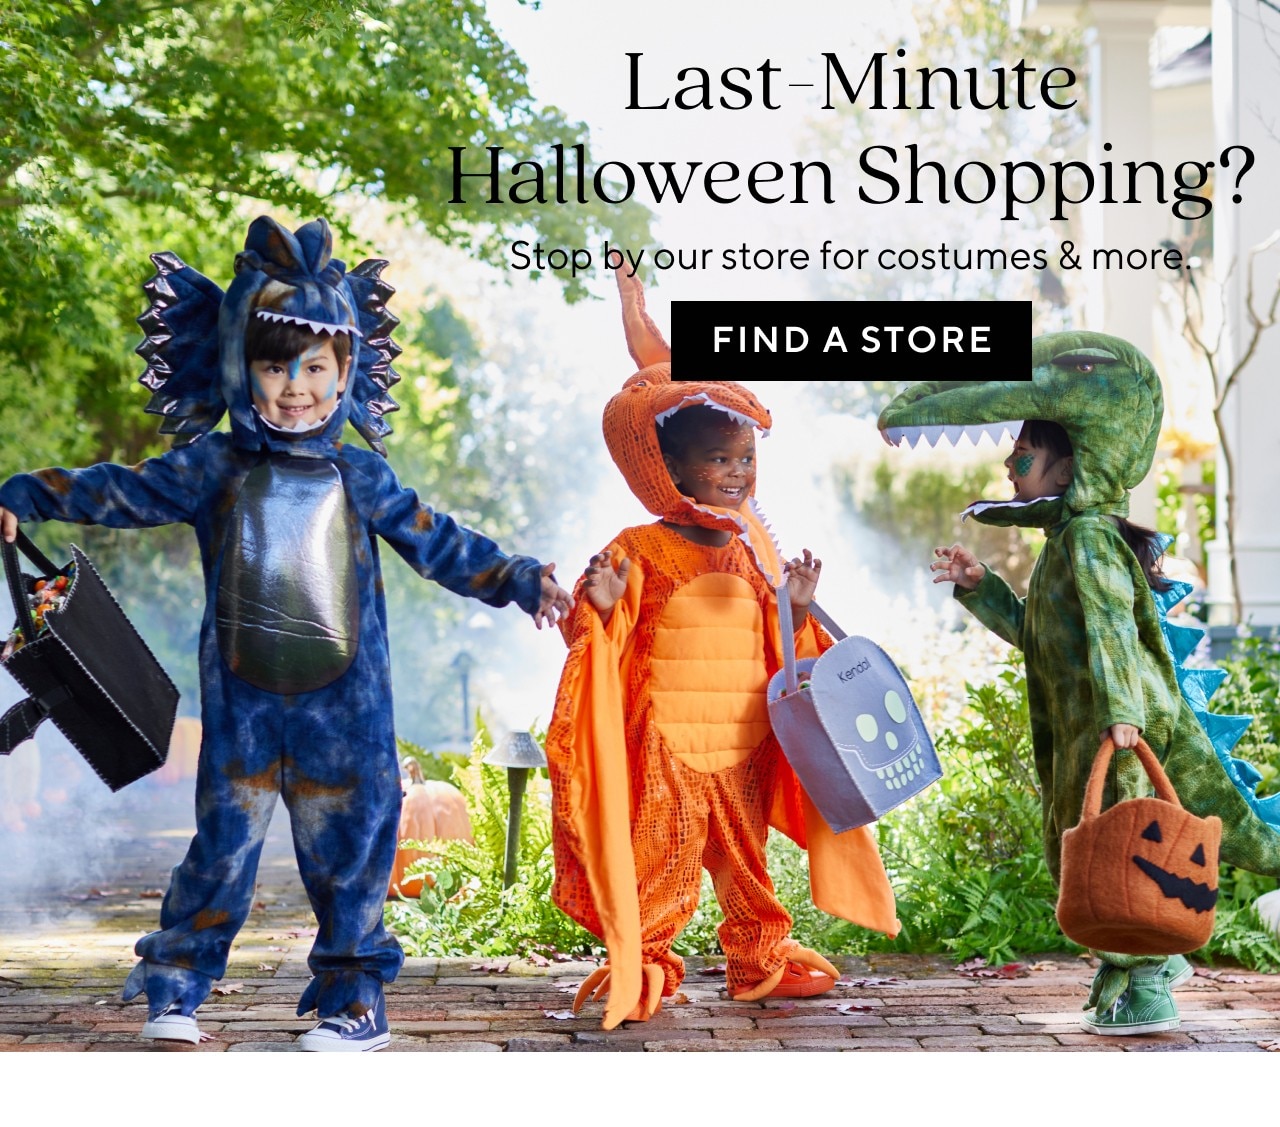 LAST MINUTE HALLOWEEN SHOPPING - FIND A STORE